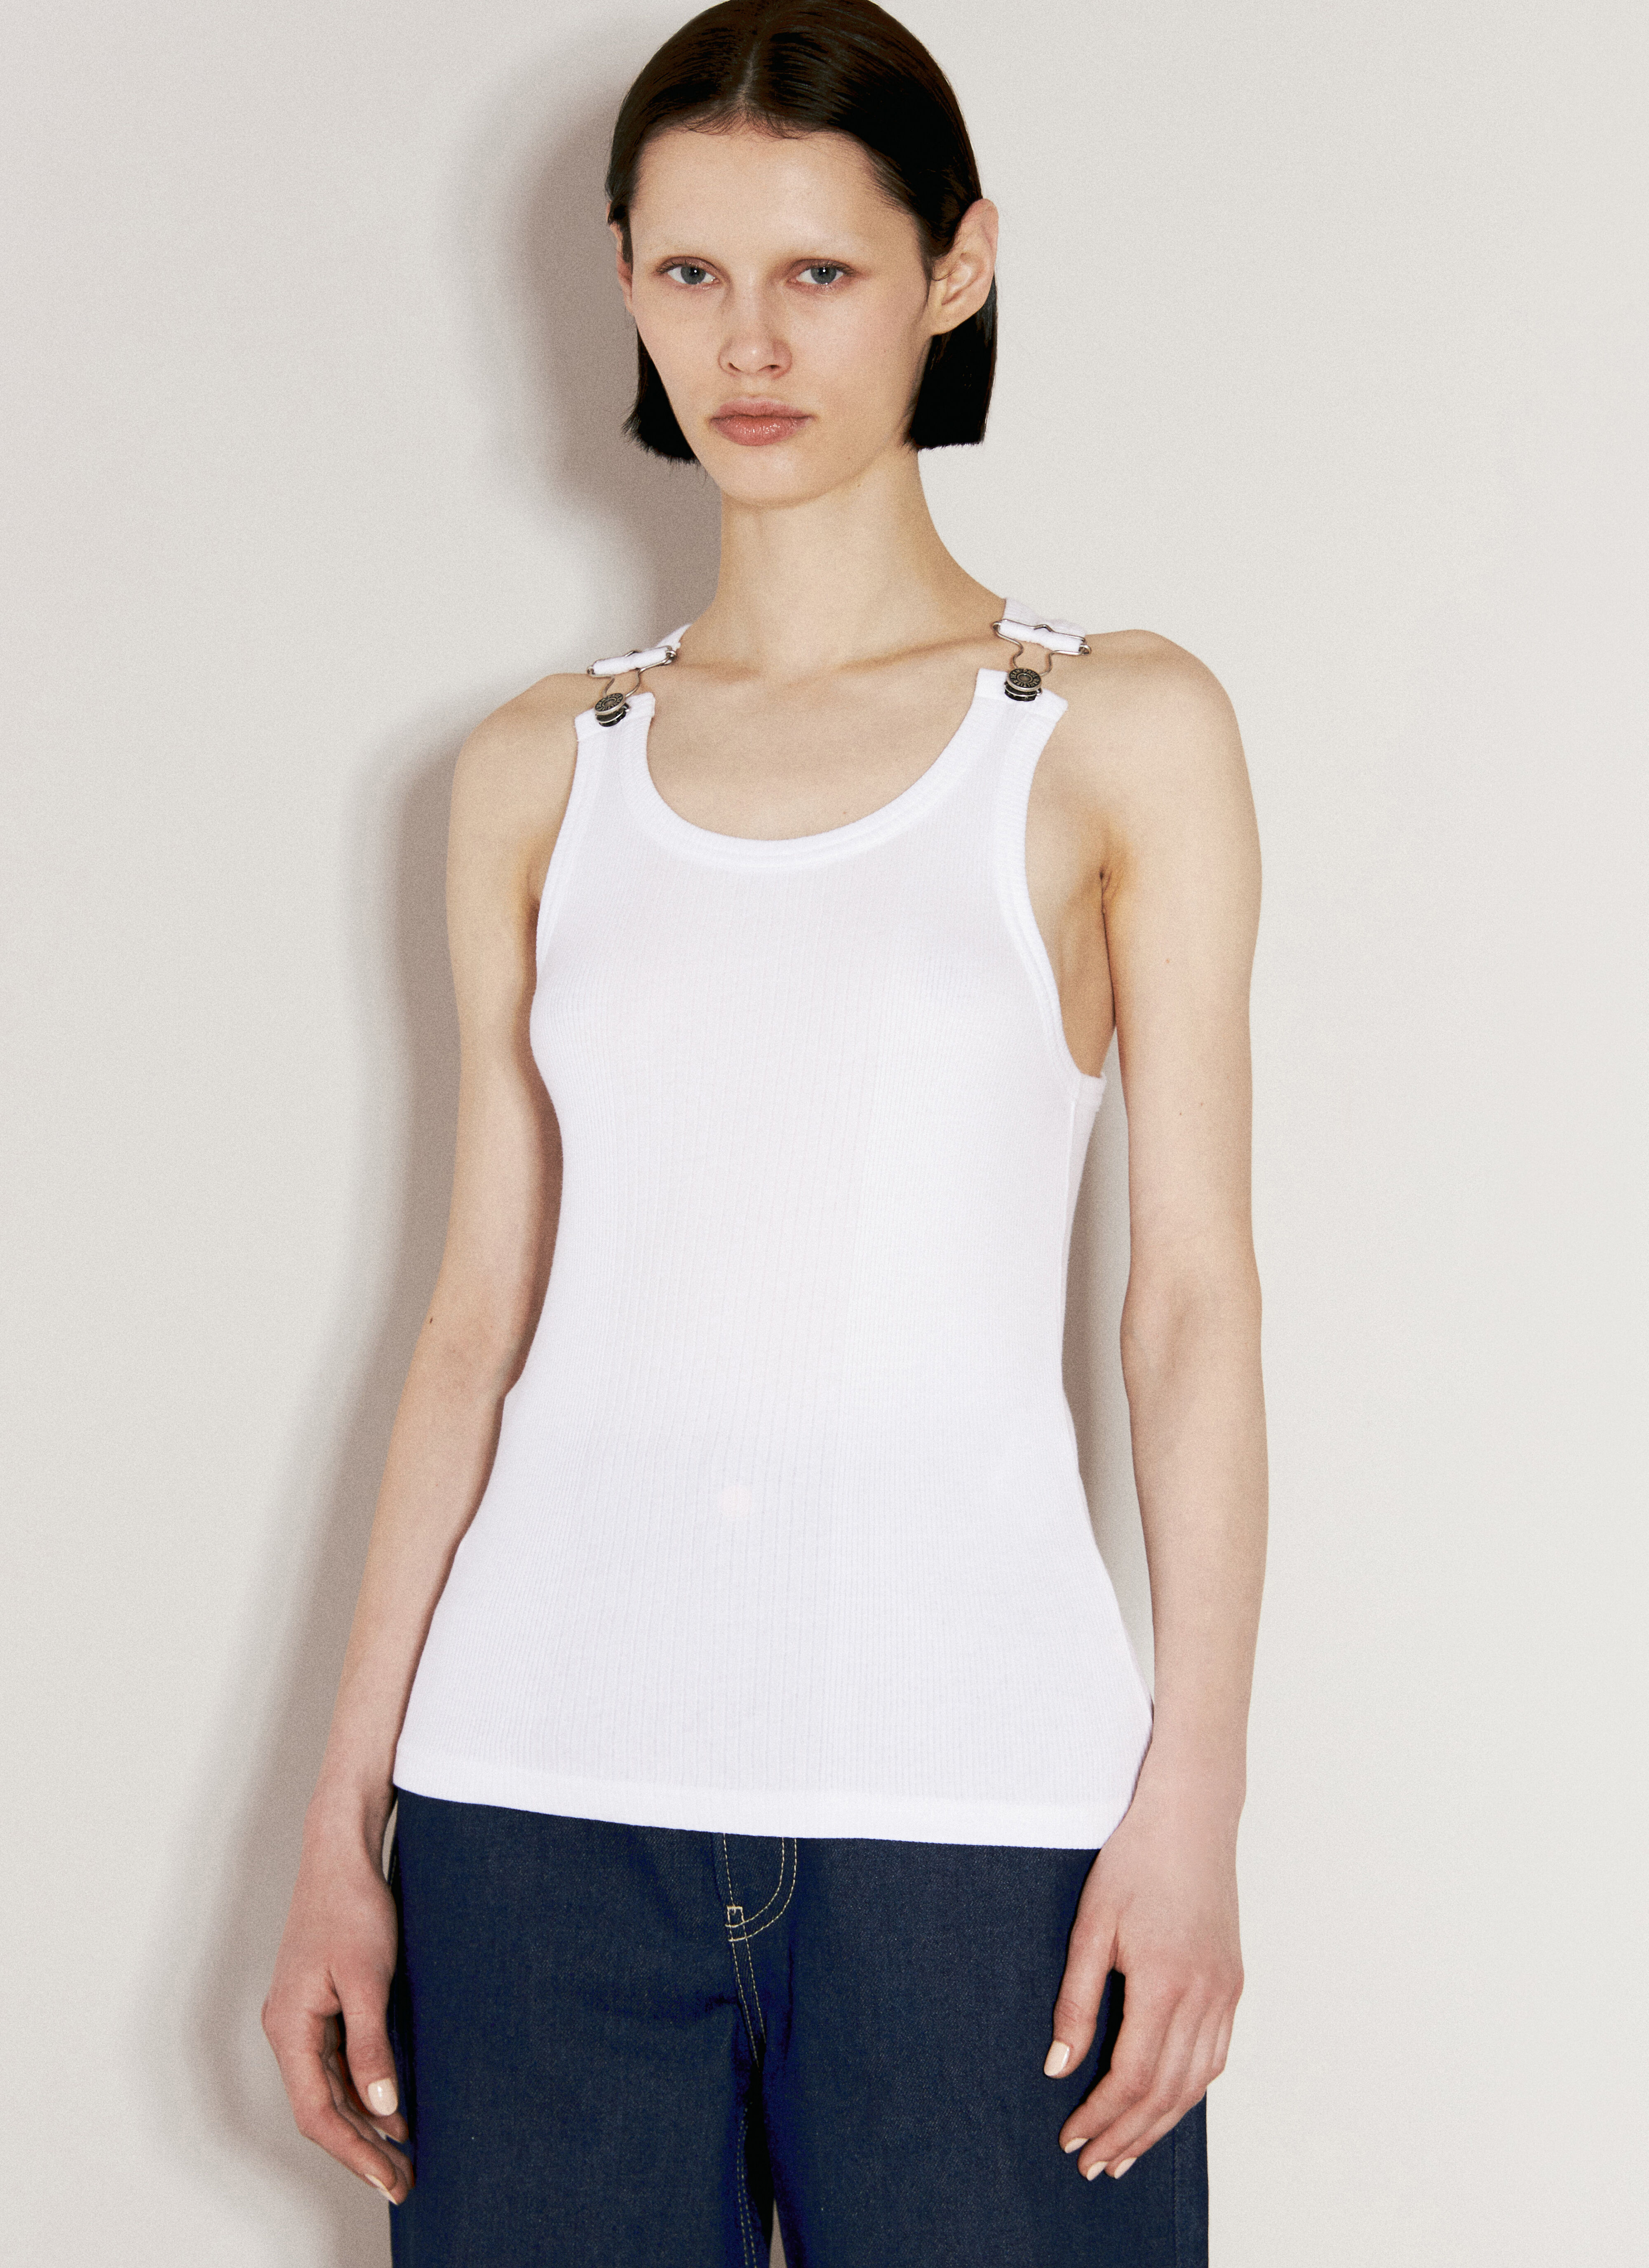 Entire Studios Overall Buckles Tank Top White ent0355006